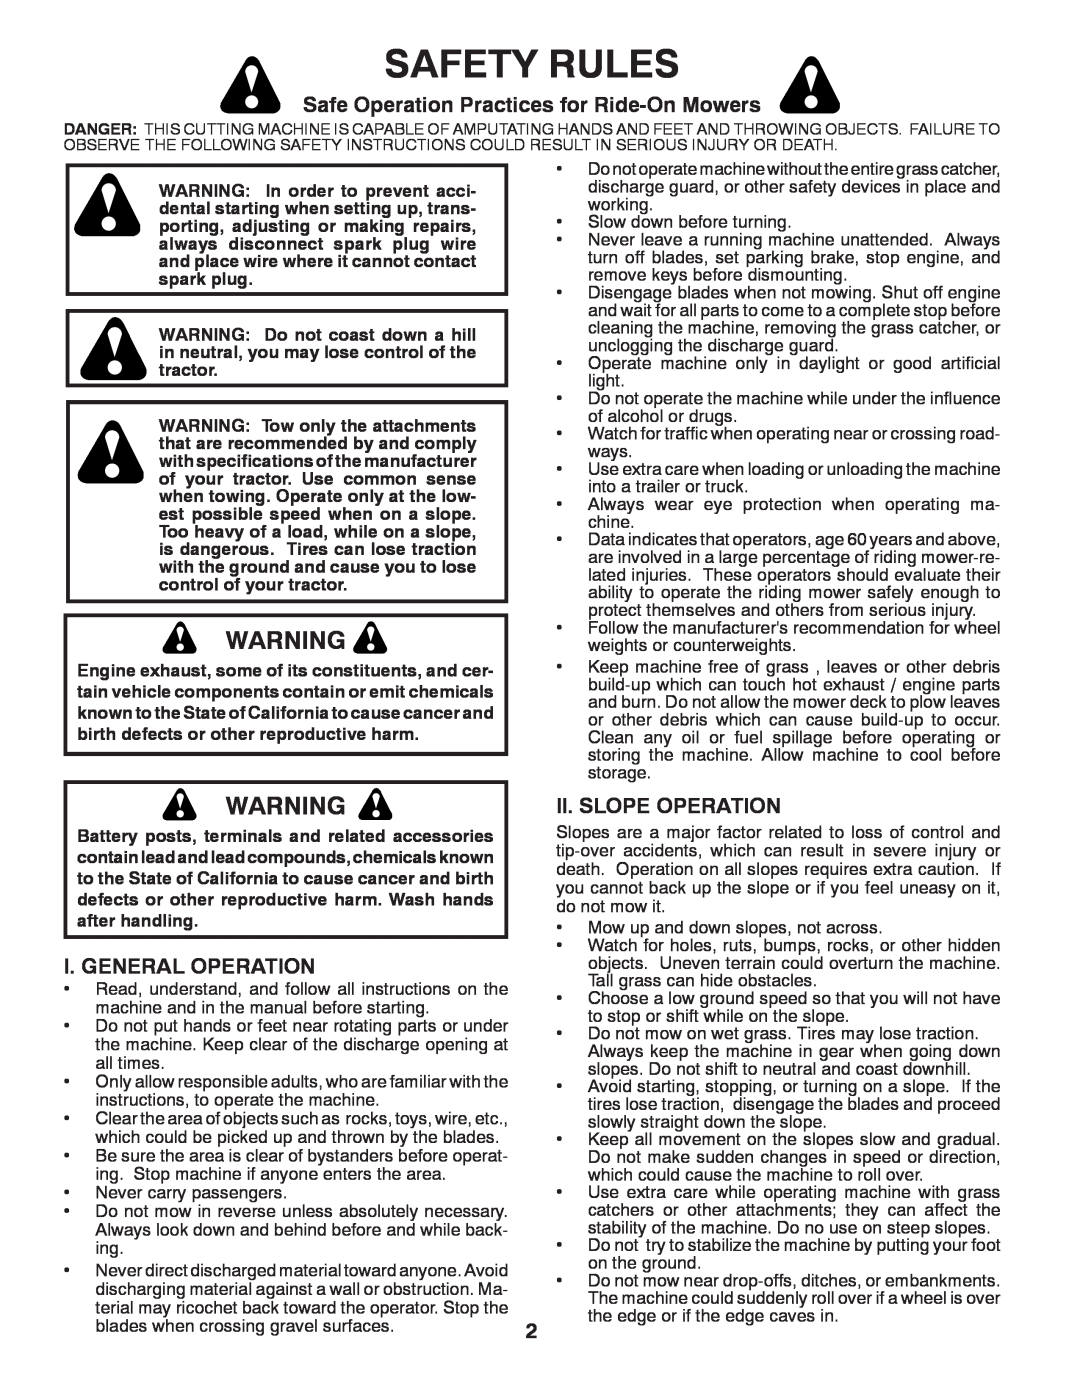 Poulan 96042004700 Safety Rules, Safe Operation Practices for Ride-On Mowers, I. General Operation, Ii. Slope Operation 